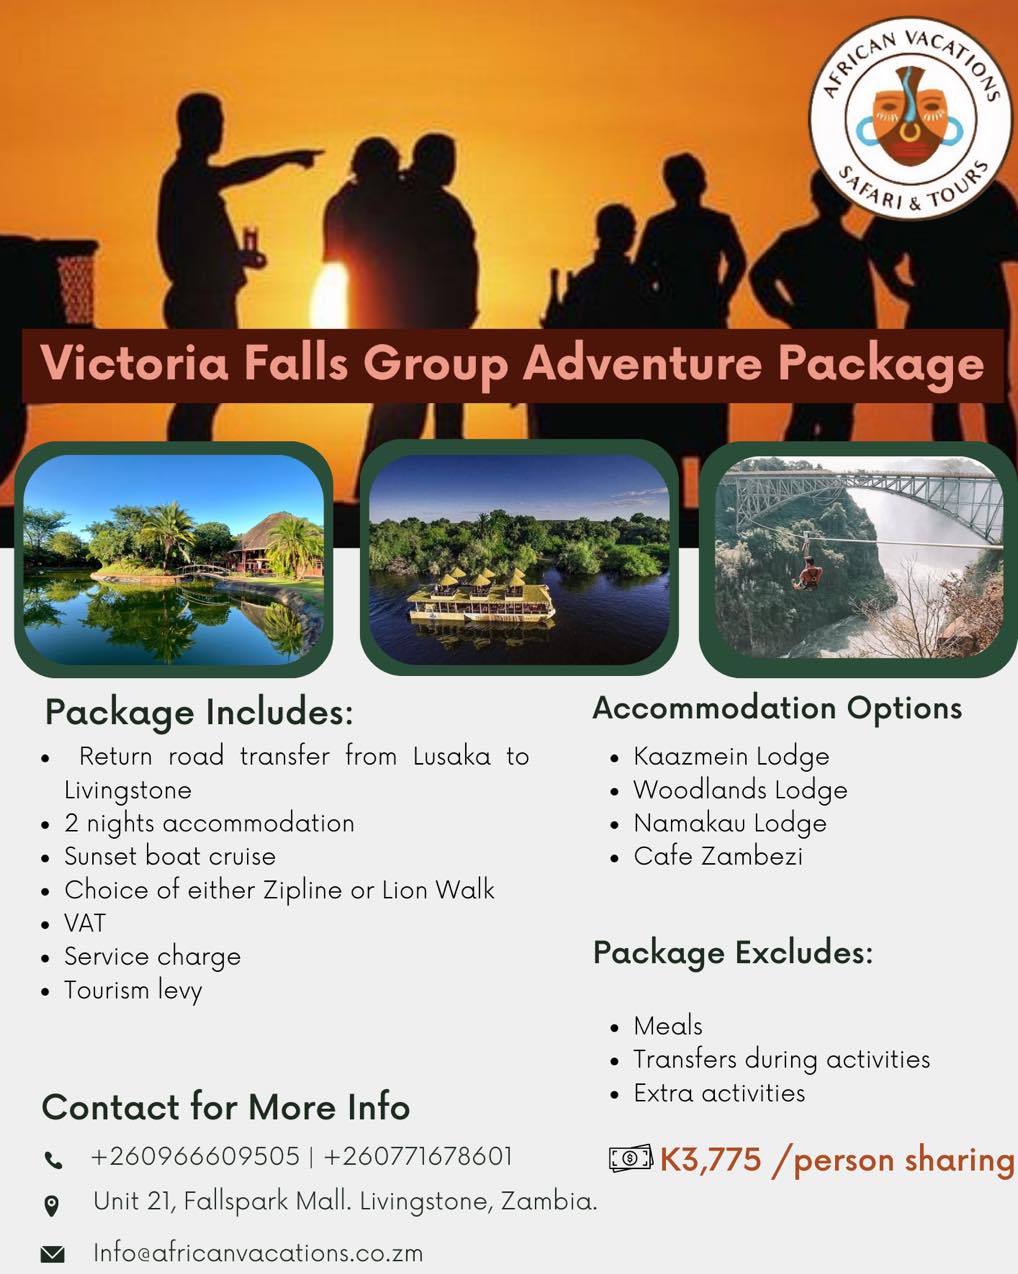 Victoria Falls Group Adventure Package